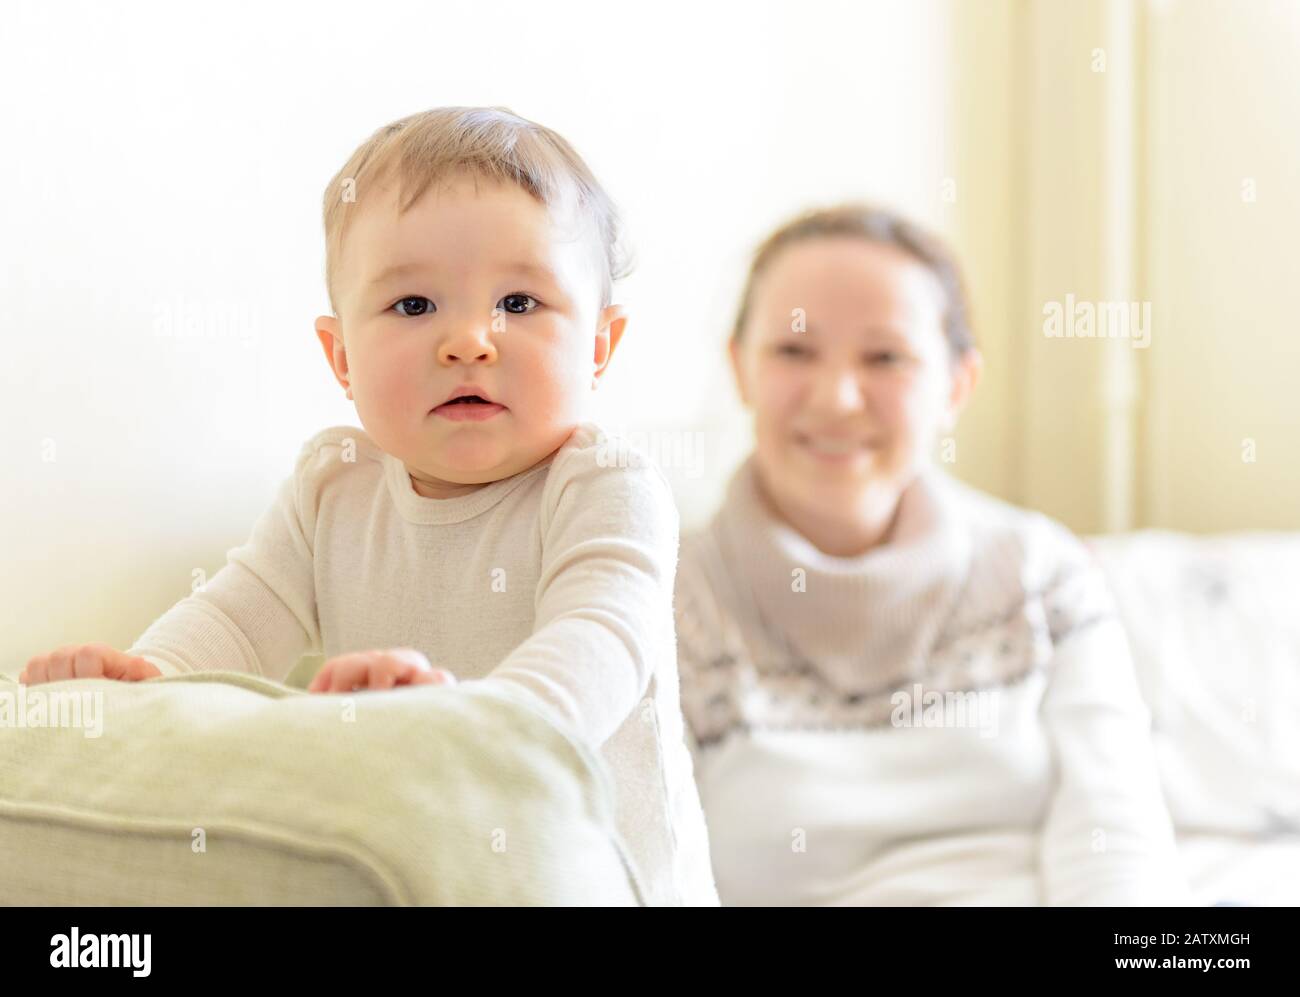 Baby girl plays with mother on the couch at home. Baby attentively looks. Stock Photo